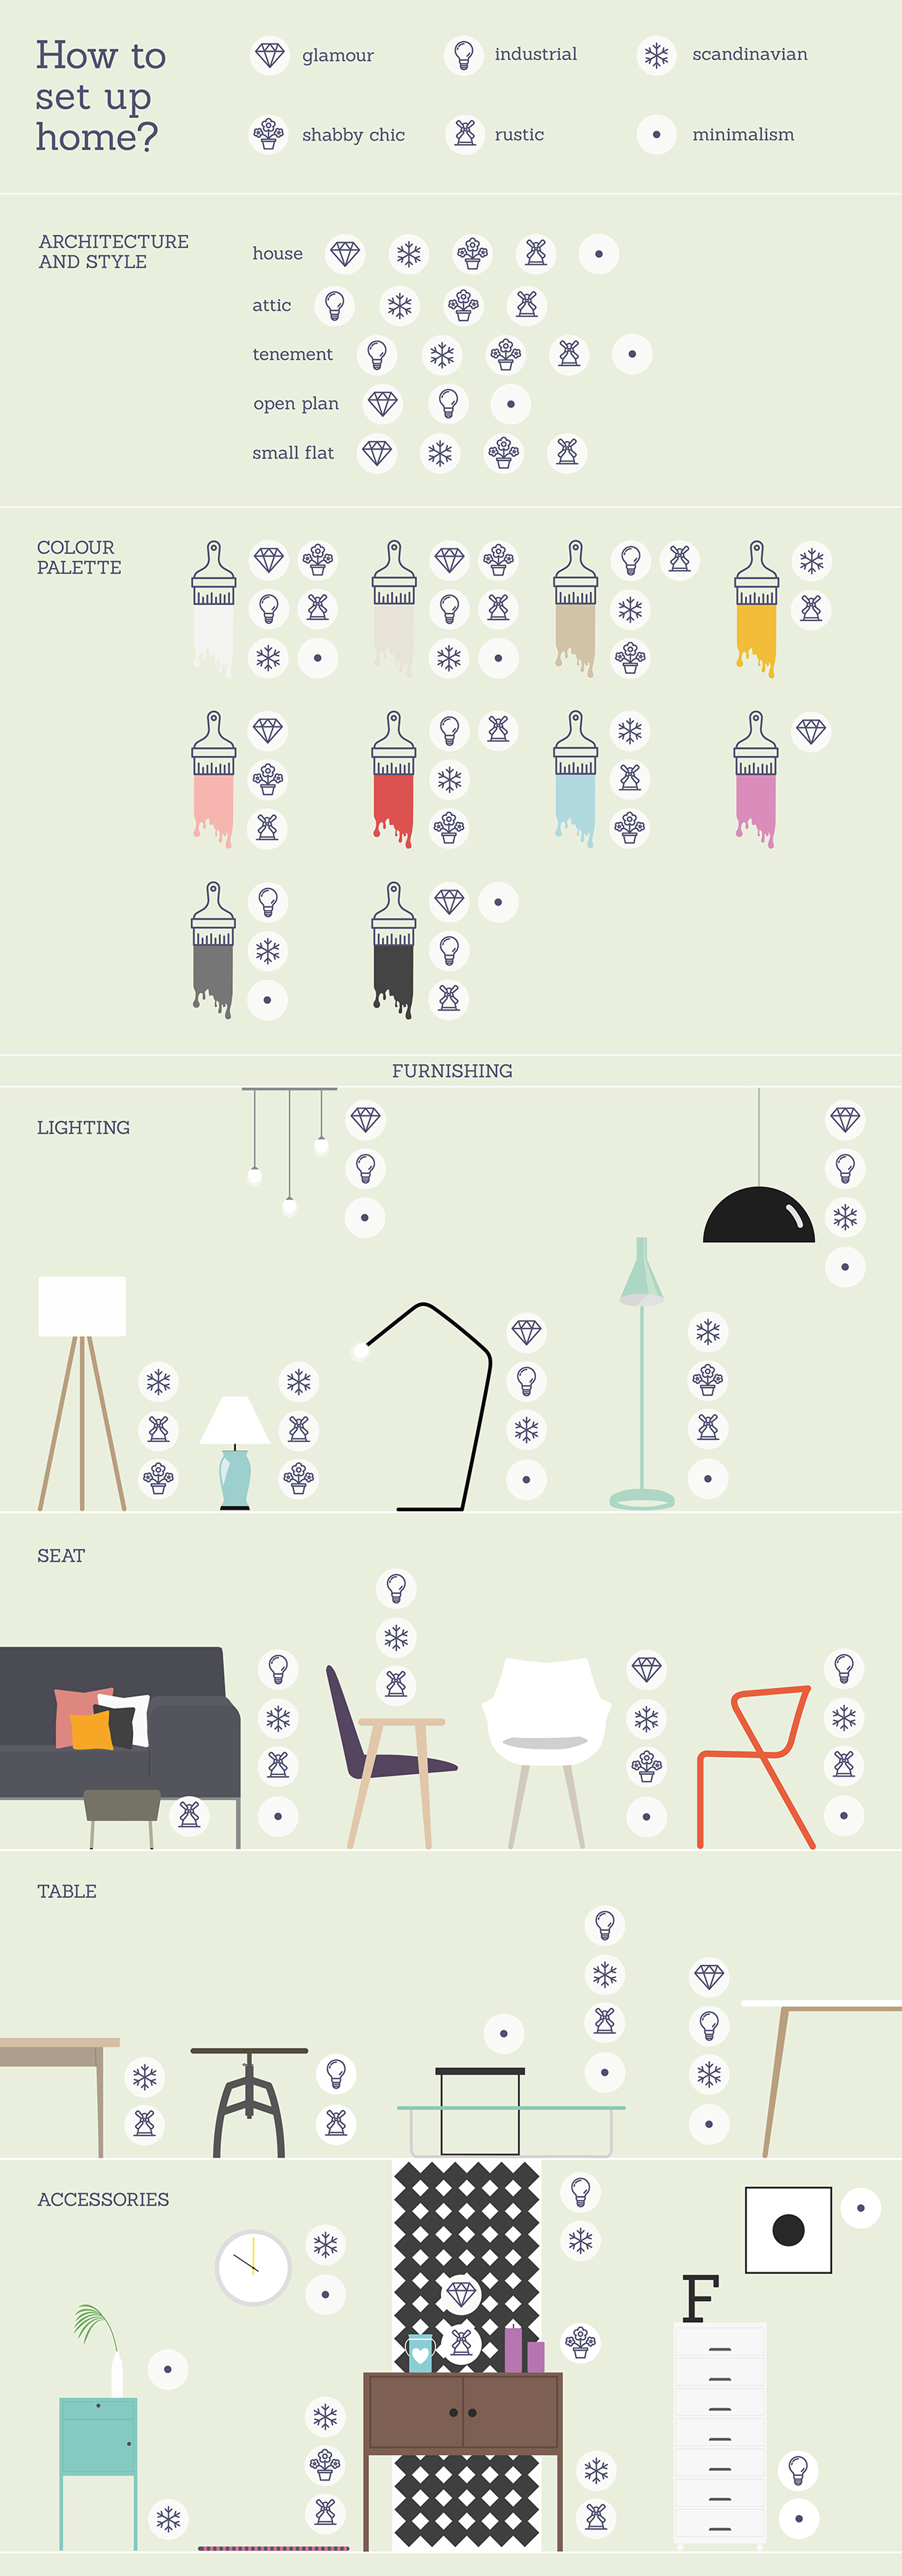 Interior infographic house colour how to Style seat lighting Icon